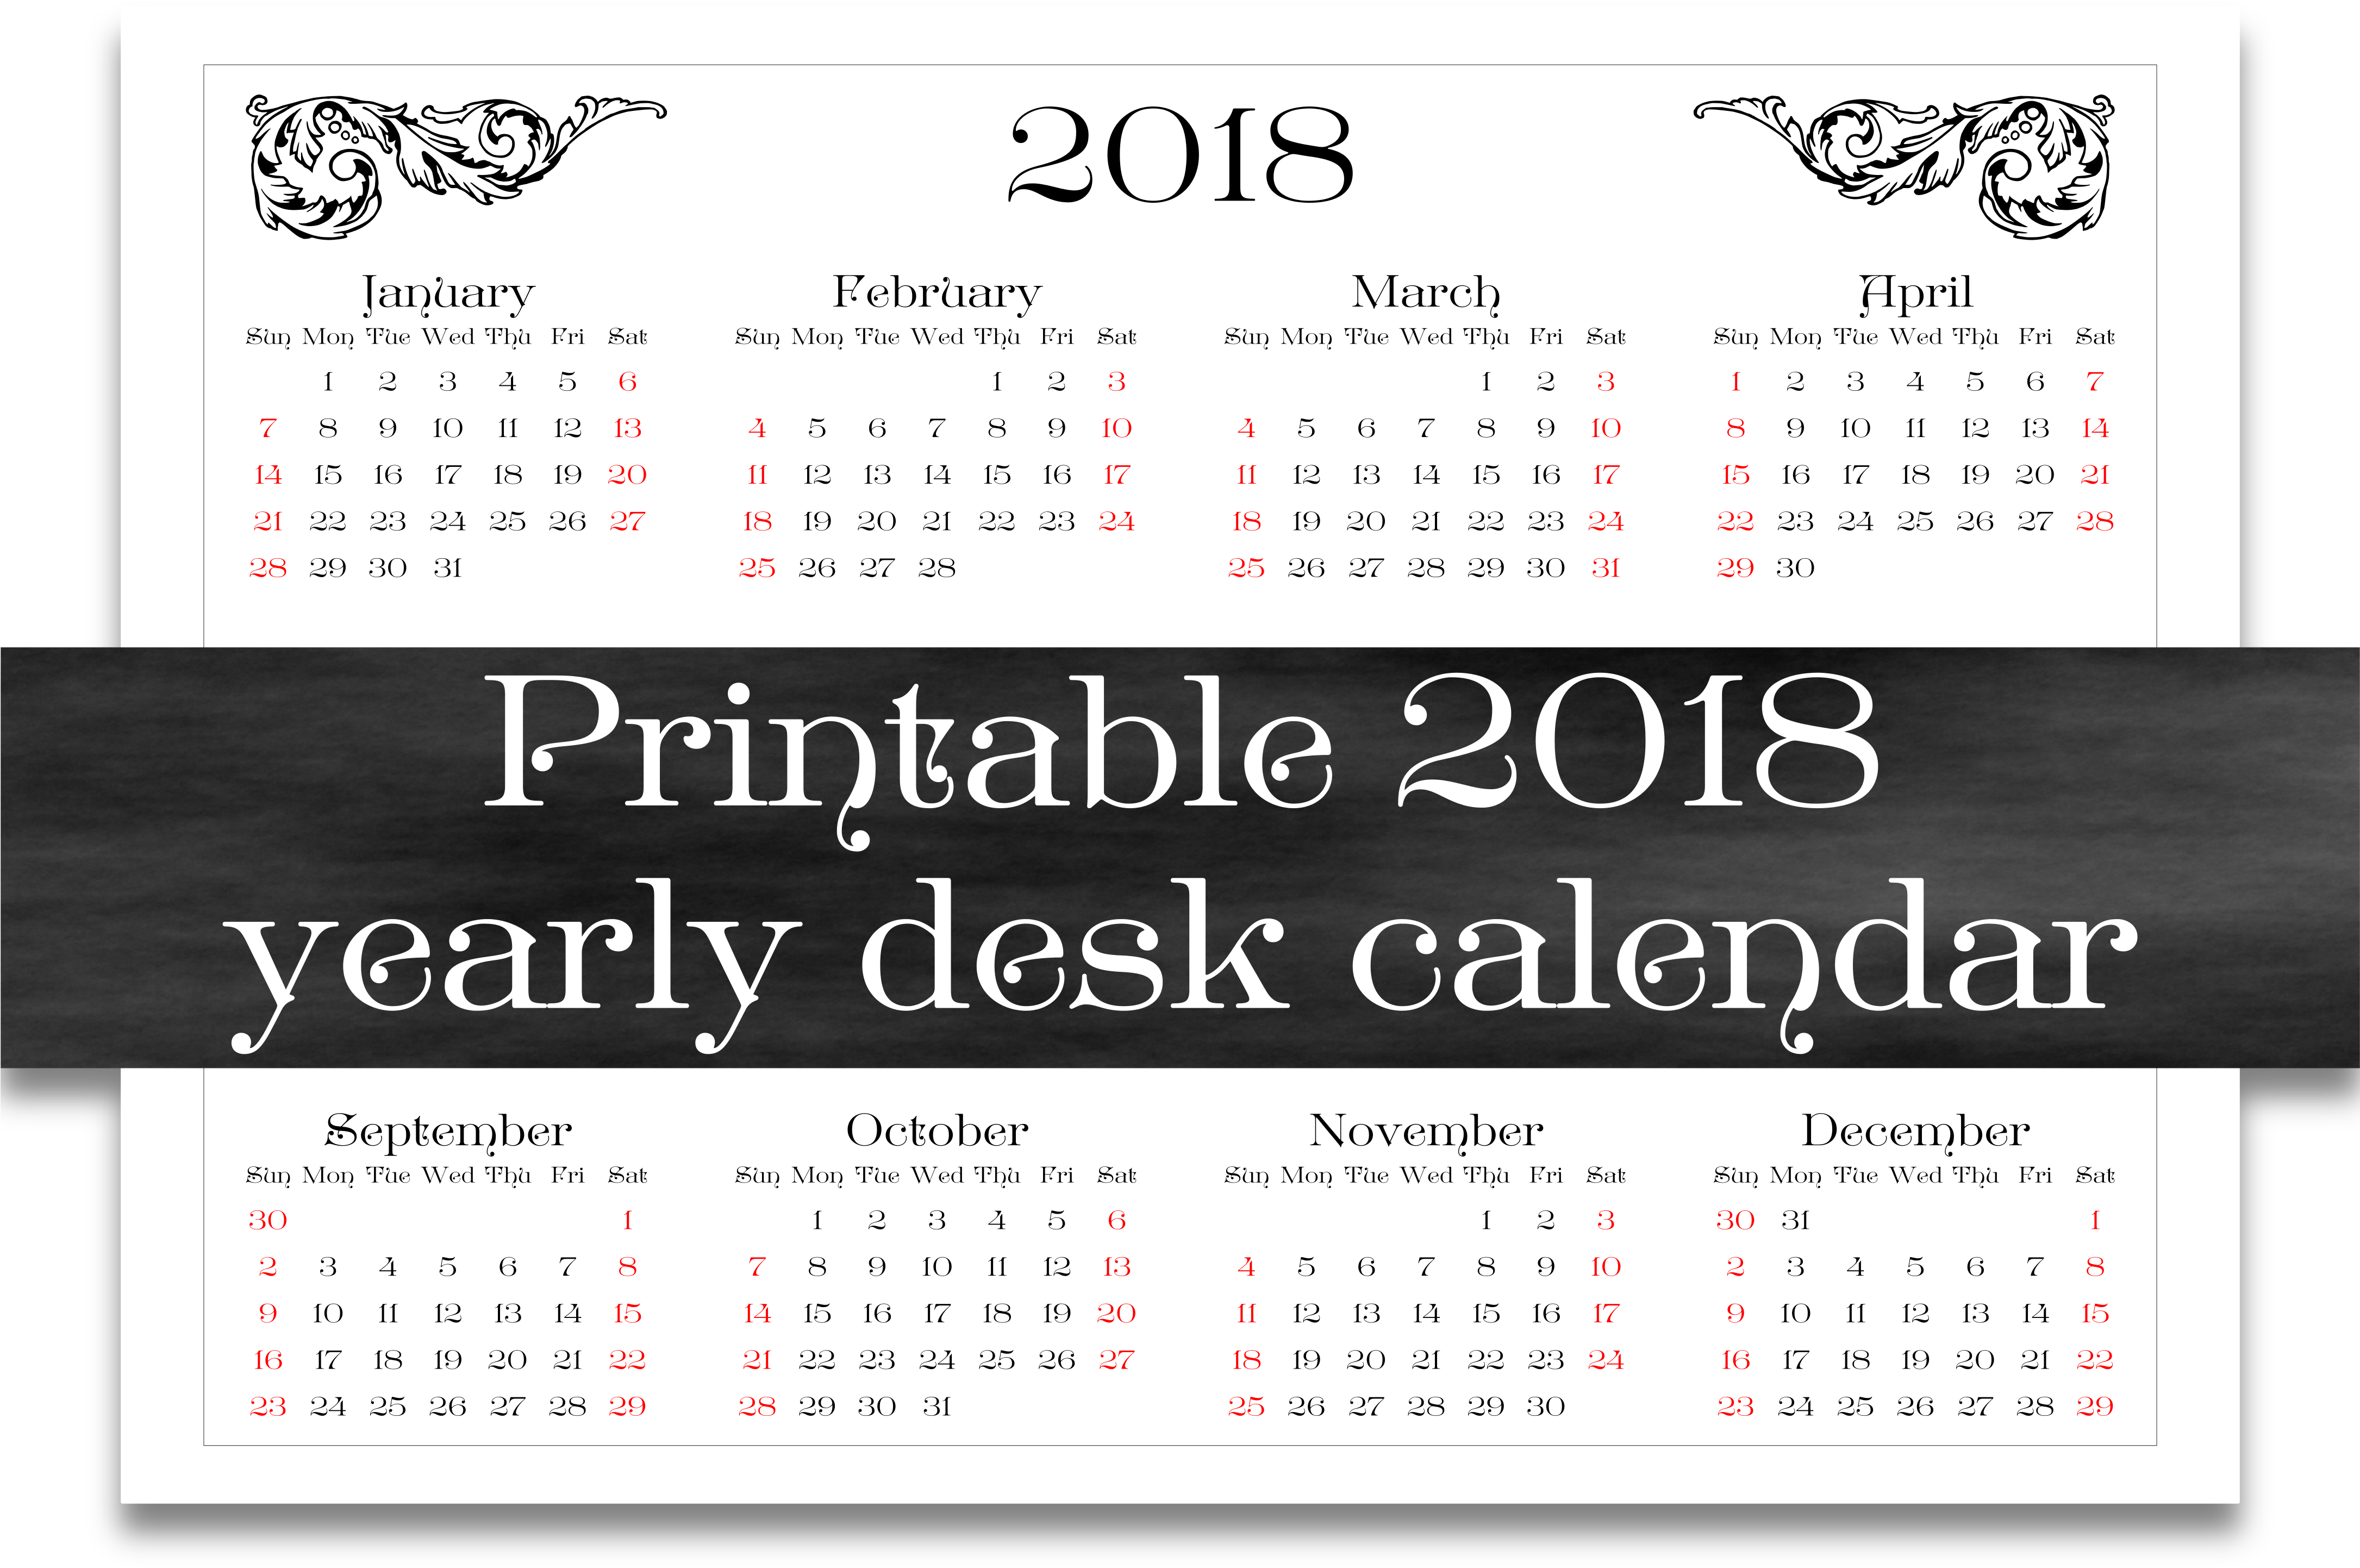 Printable 2018 Year At A Glance Calendar - Paper (4341x4341), Png Download